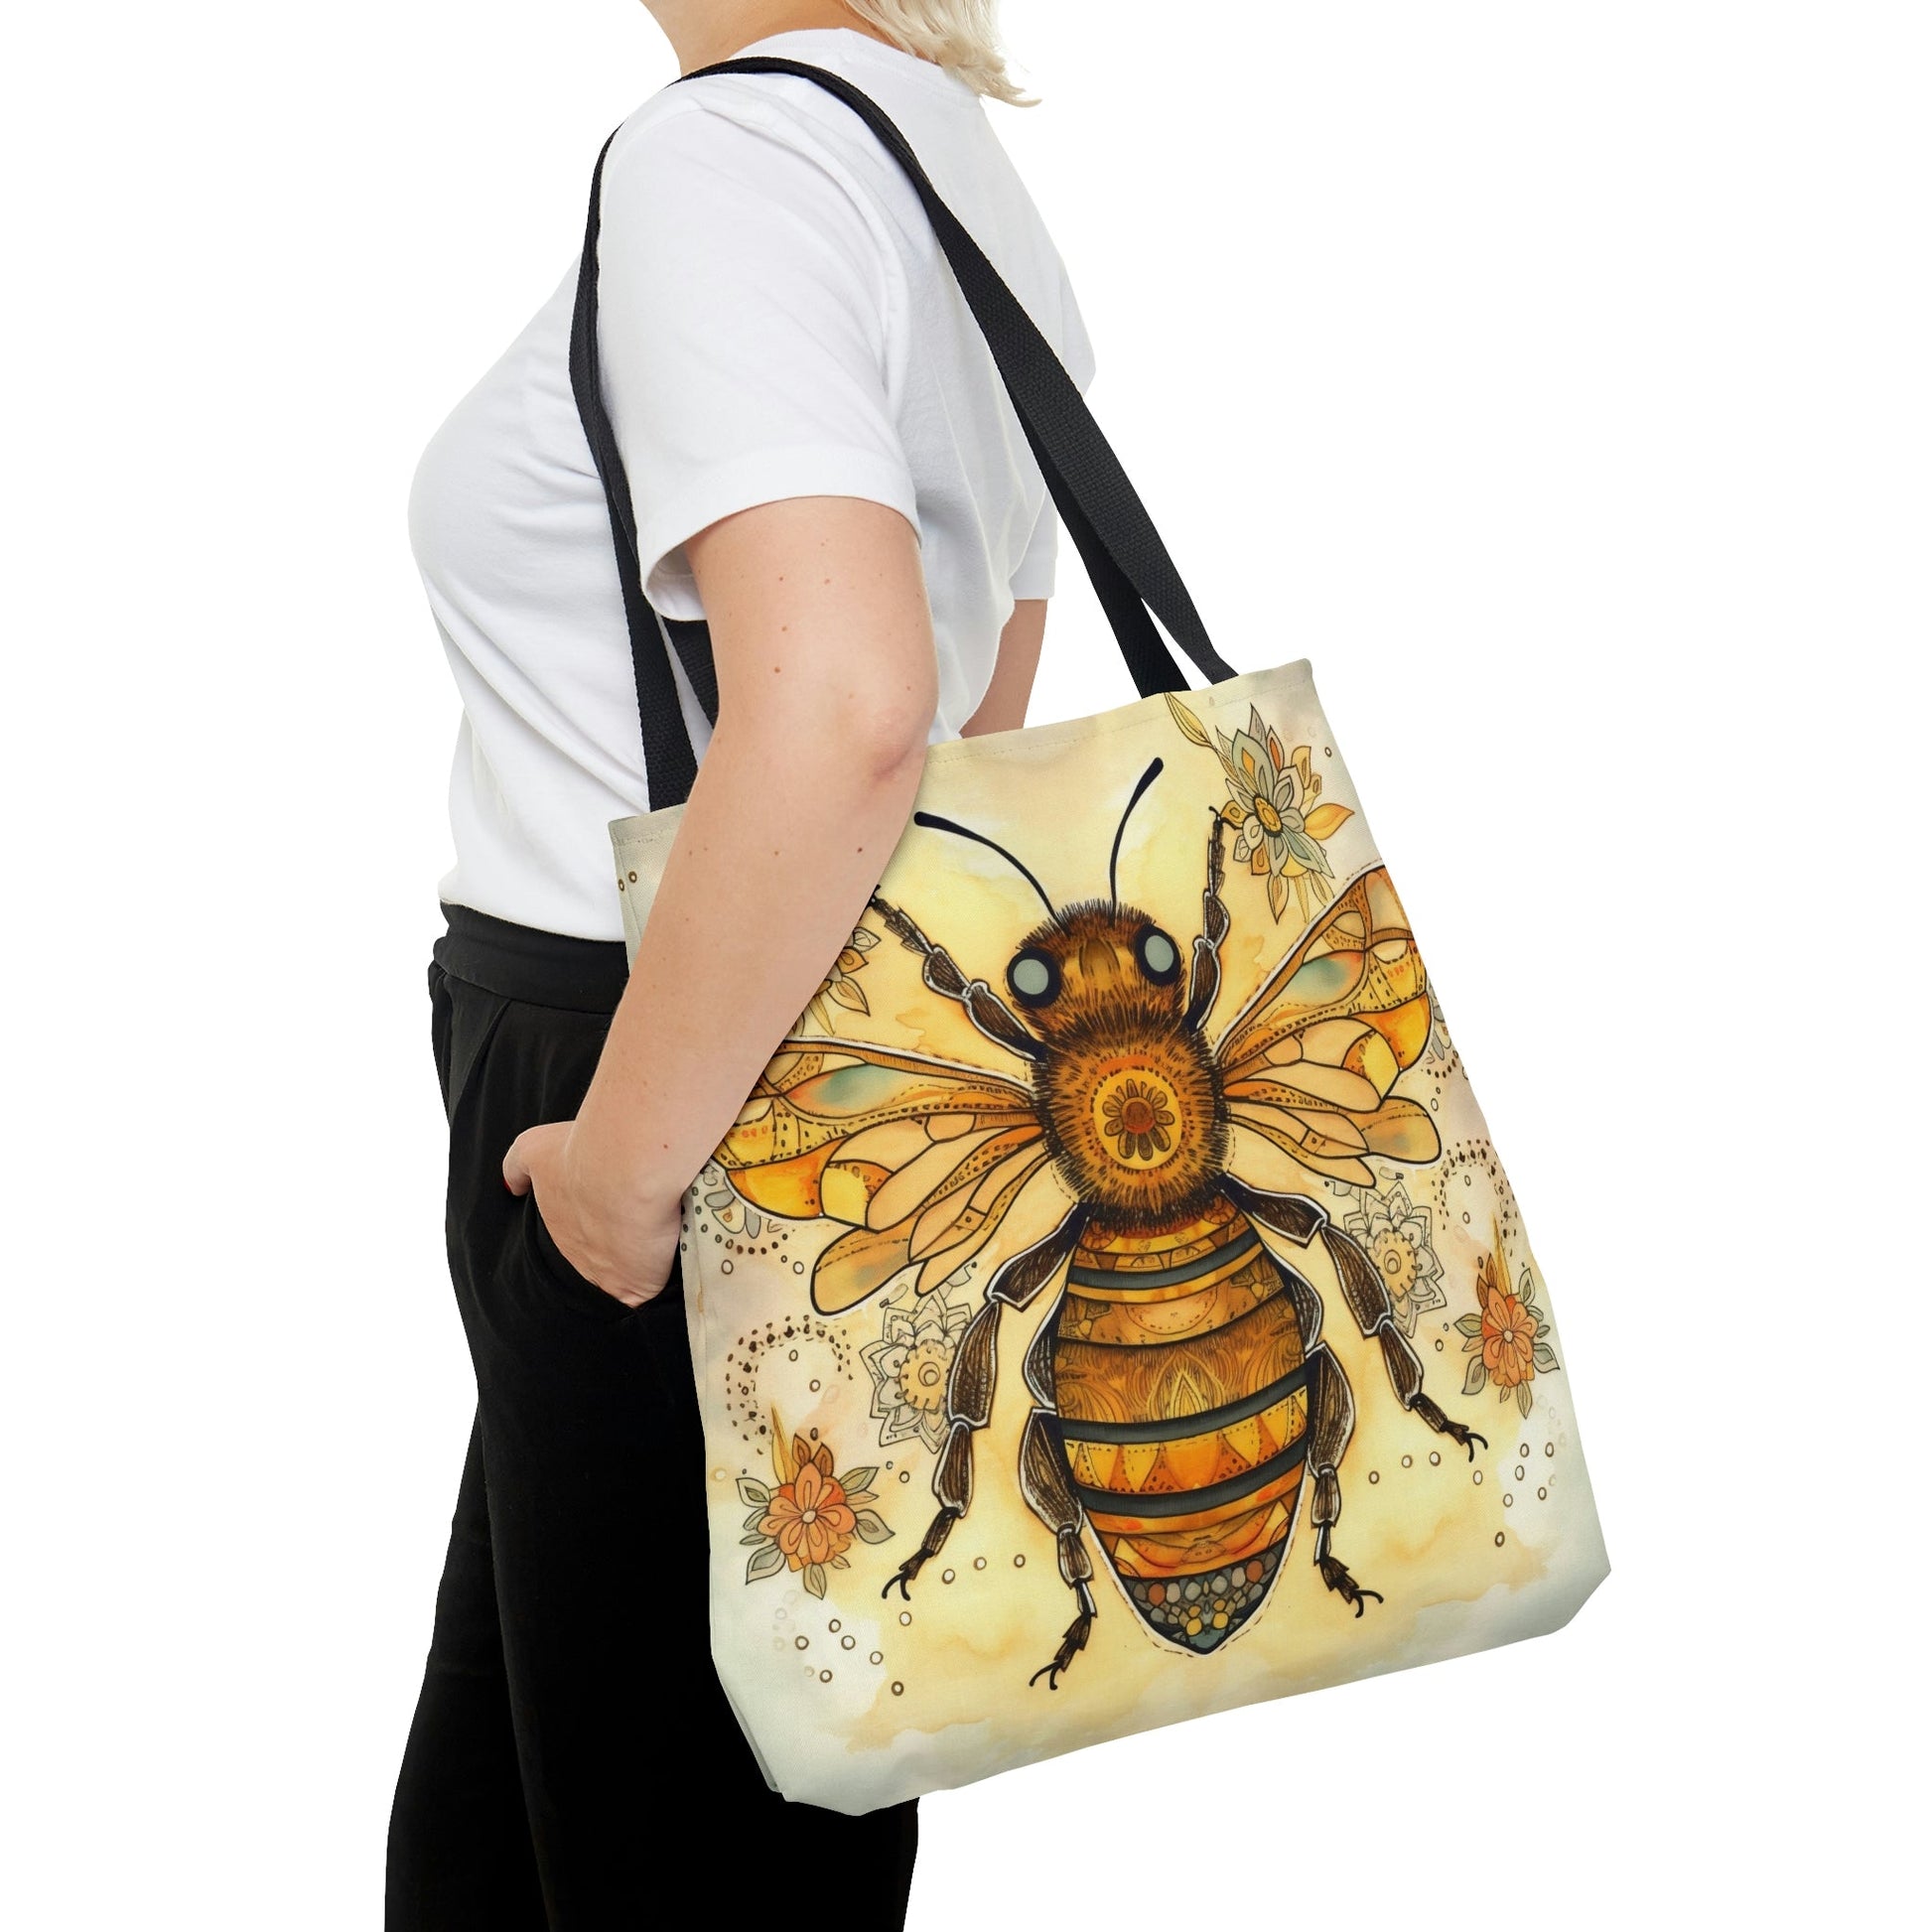 Folk Art Honey Bee Tote Bag - Cute Cottagecore Totebag Makes the Perfect Gift